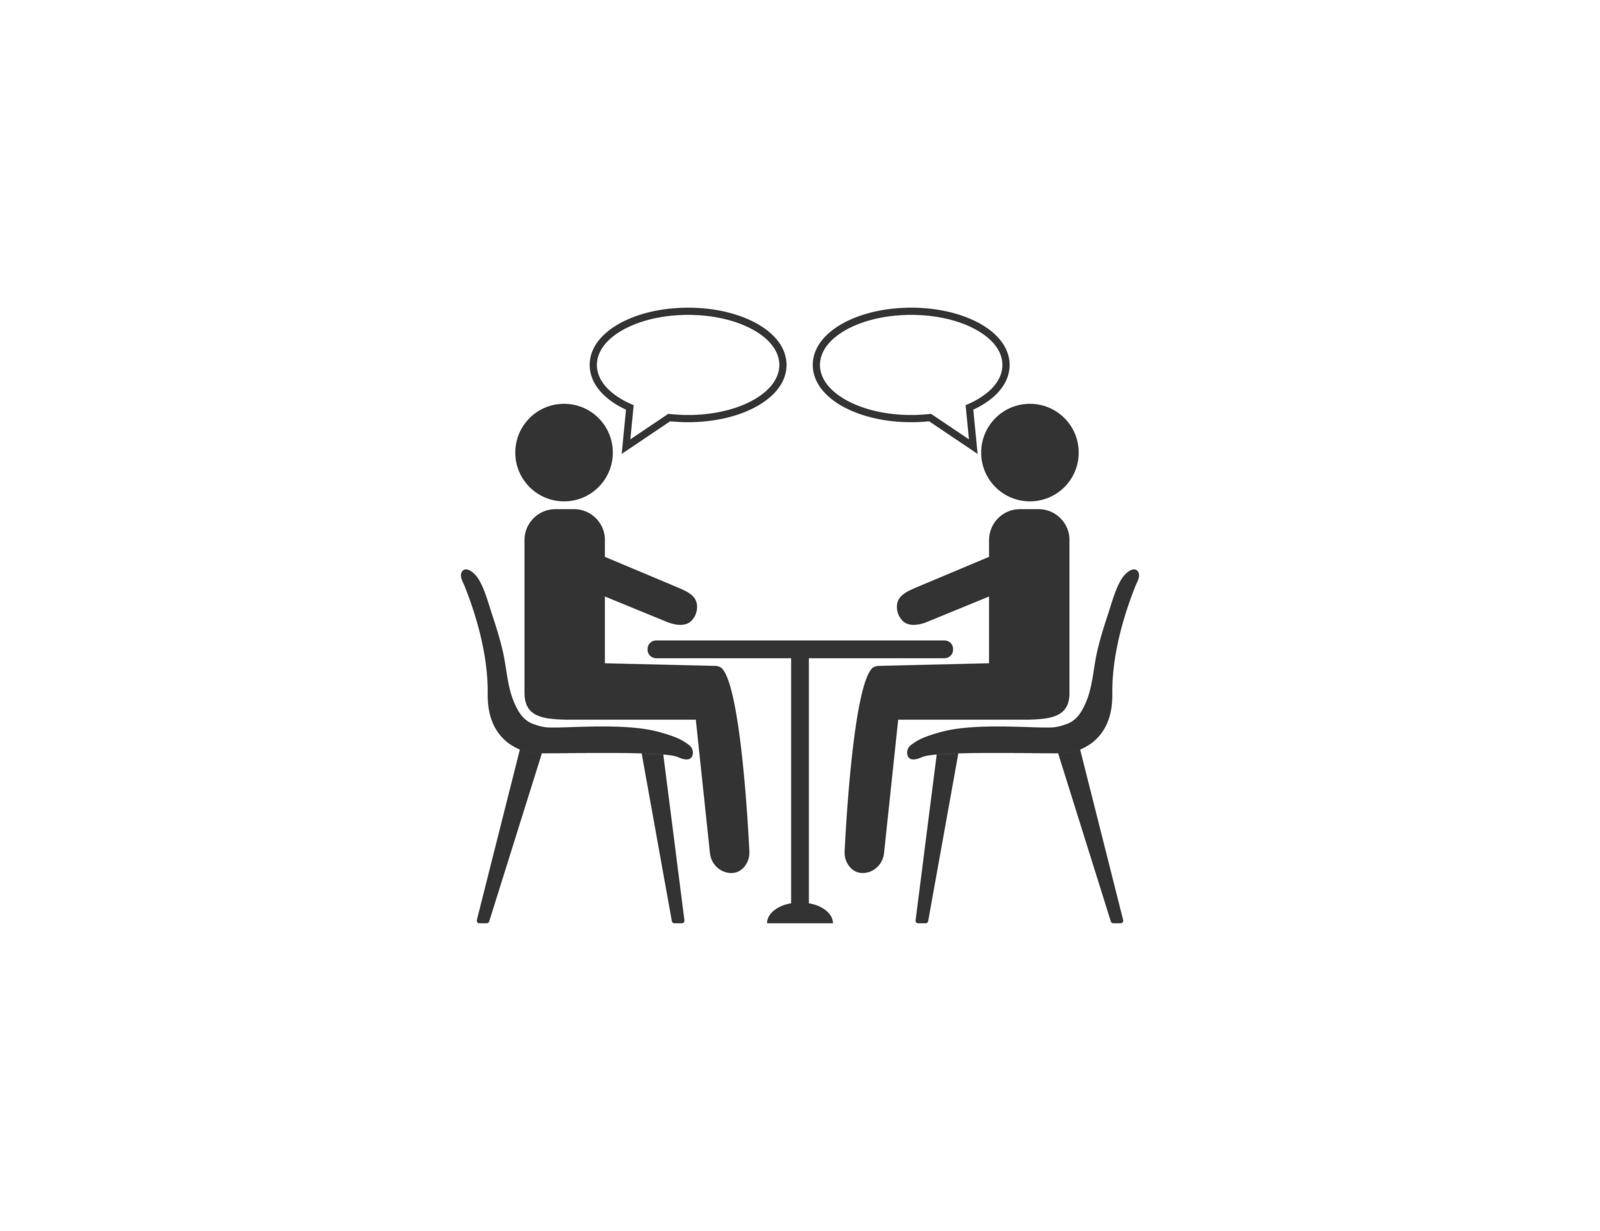 People talking icon on white background. Vector illustration. by Vertyb